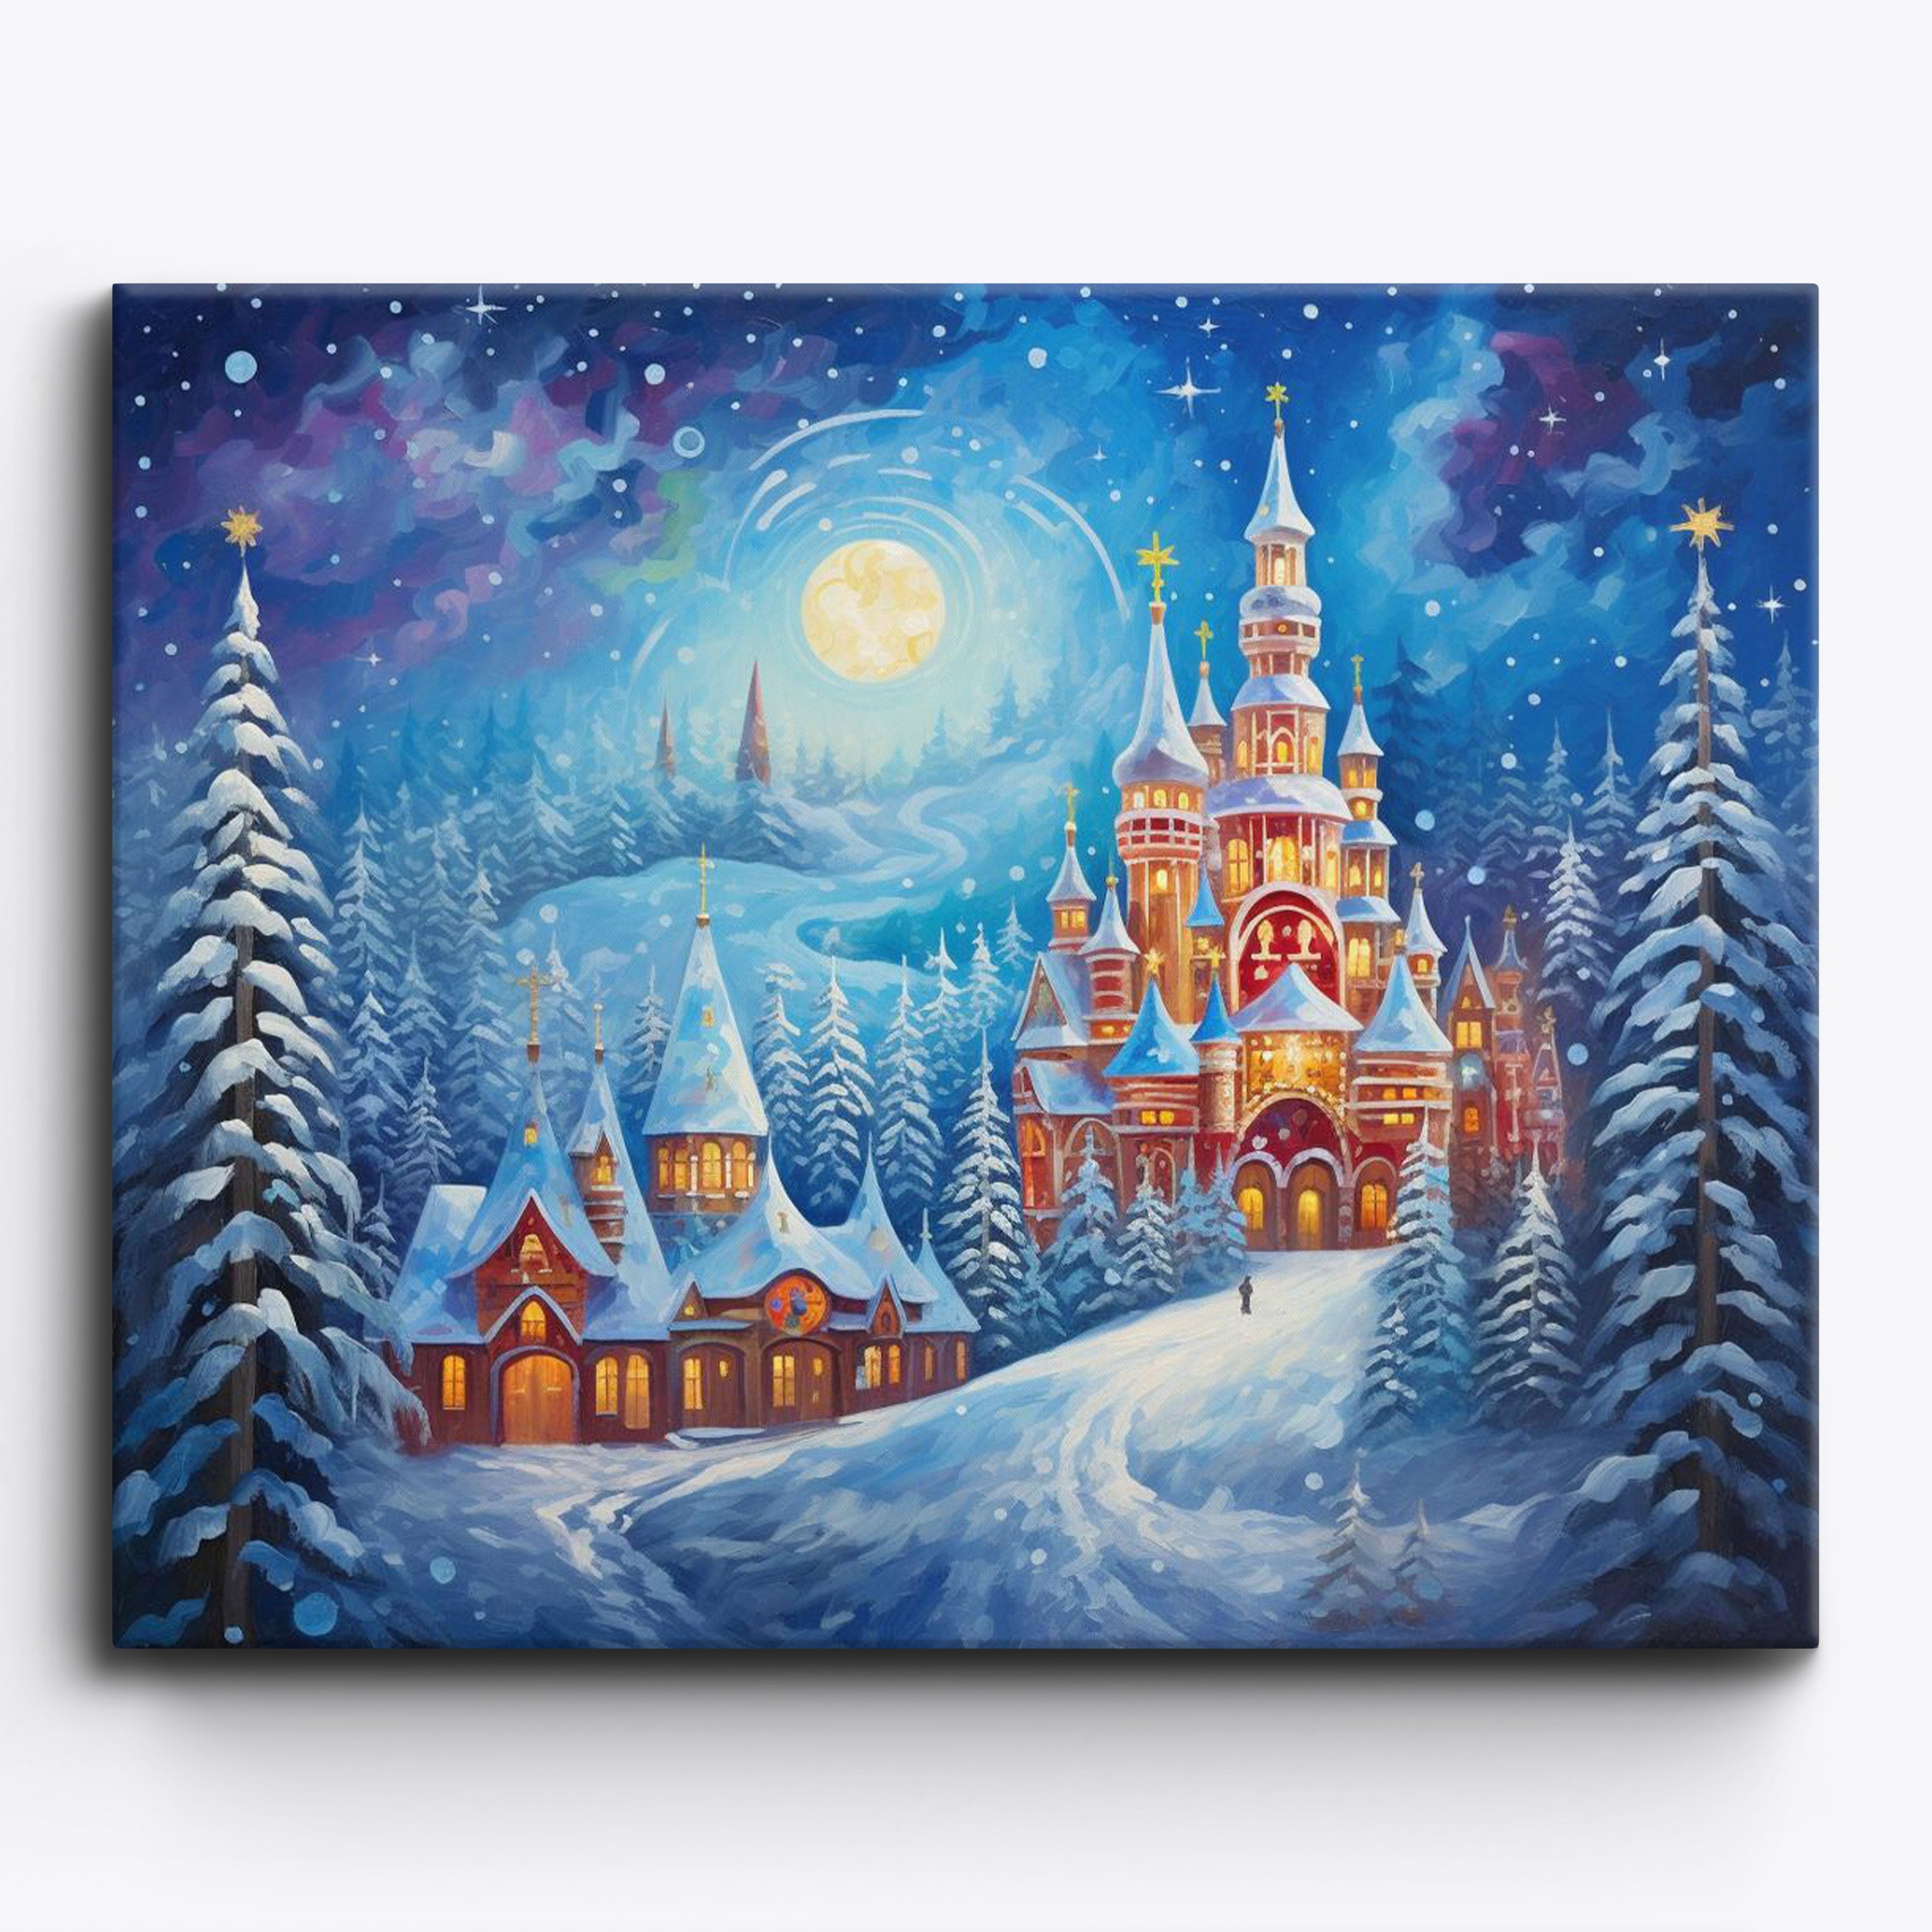 Galison Snowy City – DIY Paint by Number Kit with Stunning Winter City  Design for Beginners and Experts Includes Easel Paint and Brushes